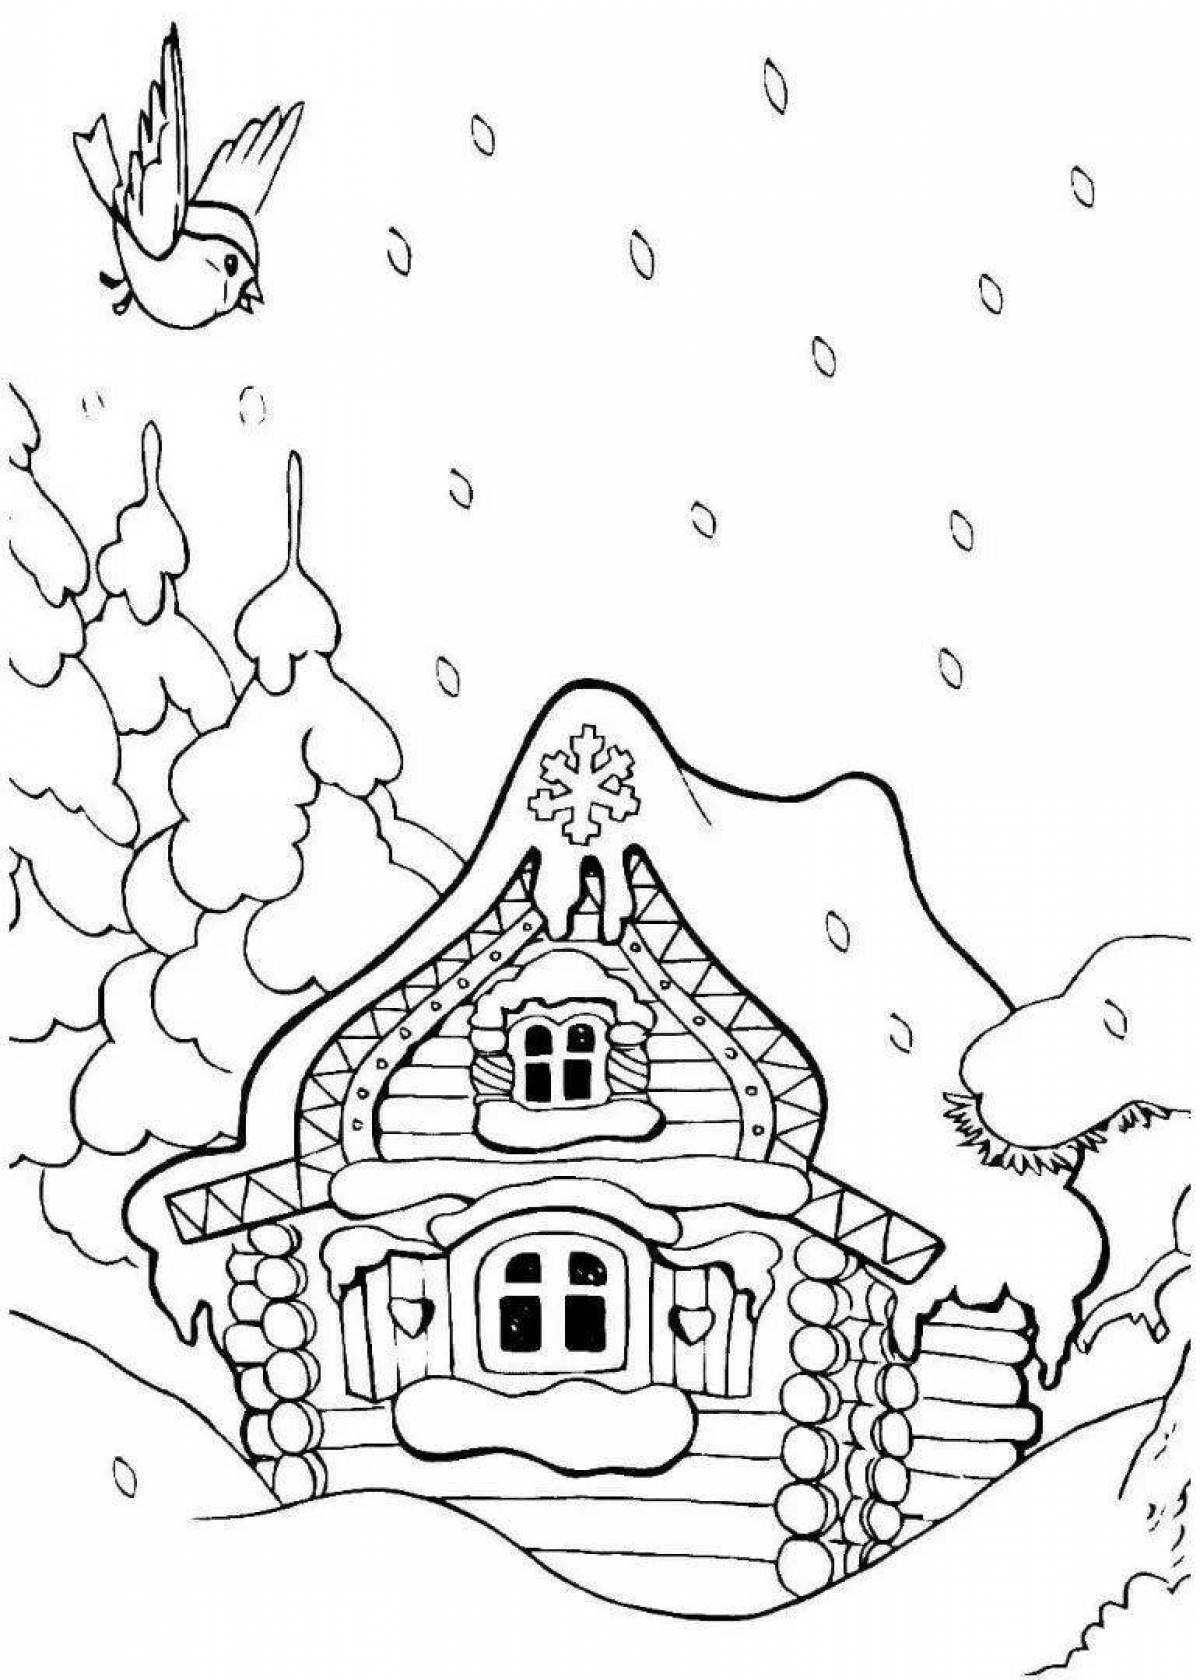 Glowing hut coloring book for kids